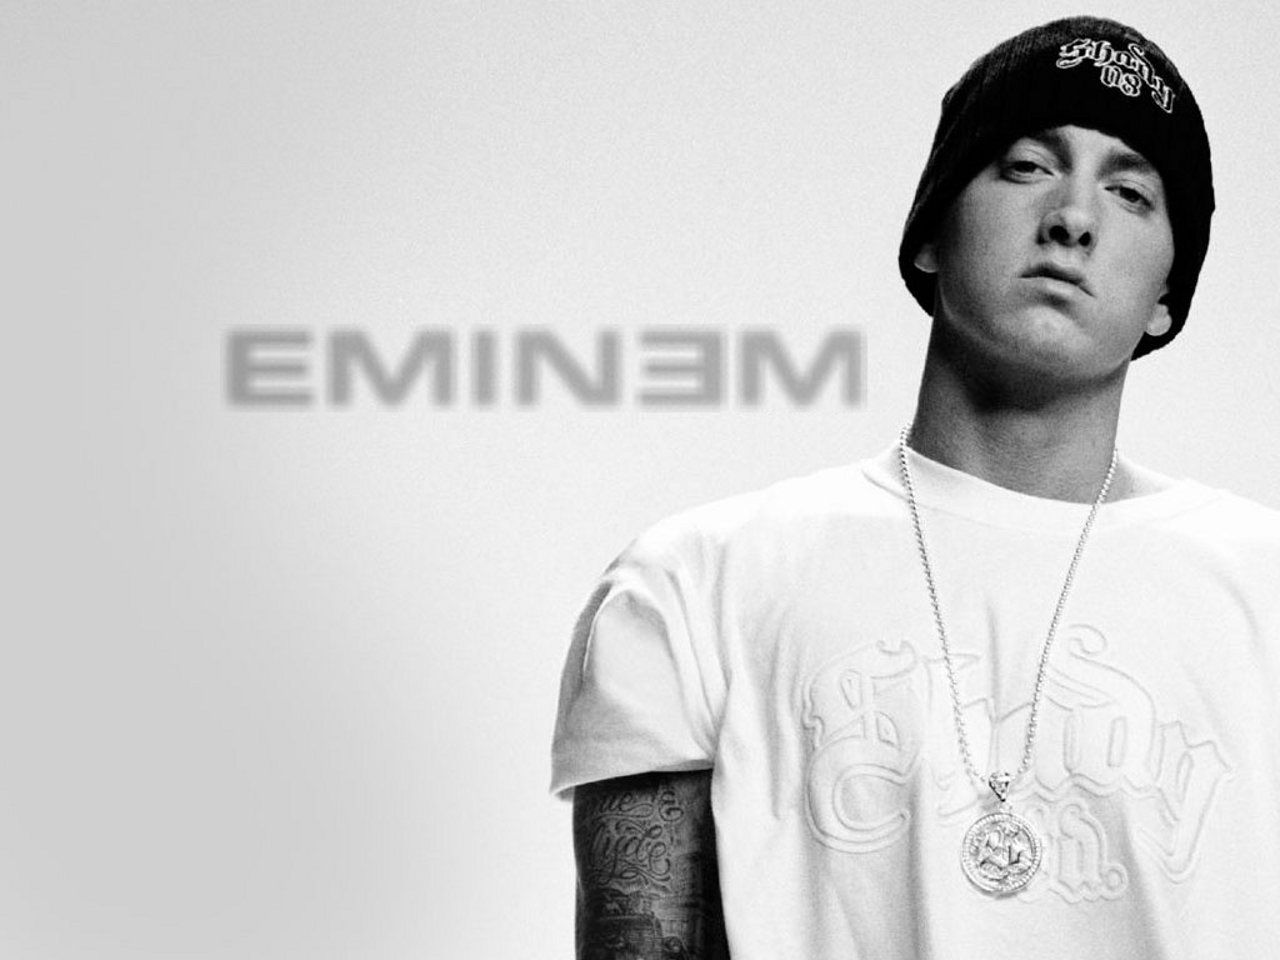 Eminem You can do anything you set your mind to. (Lose Yourself) ♥ my nusring school motivator song!!!. Eminem wallpaper, Eminem, The real slim shady